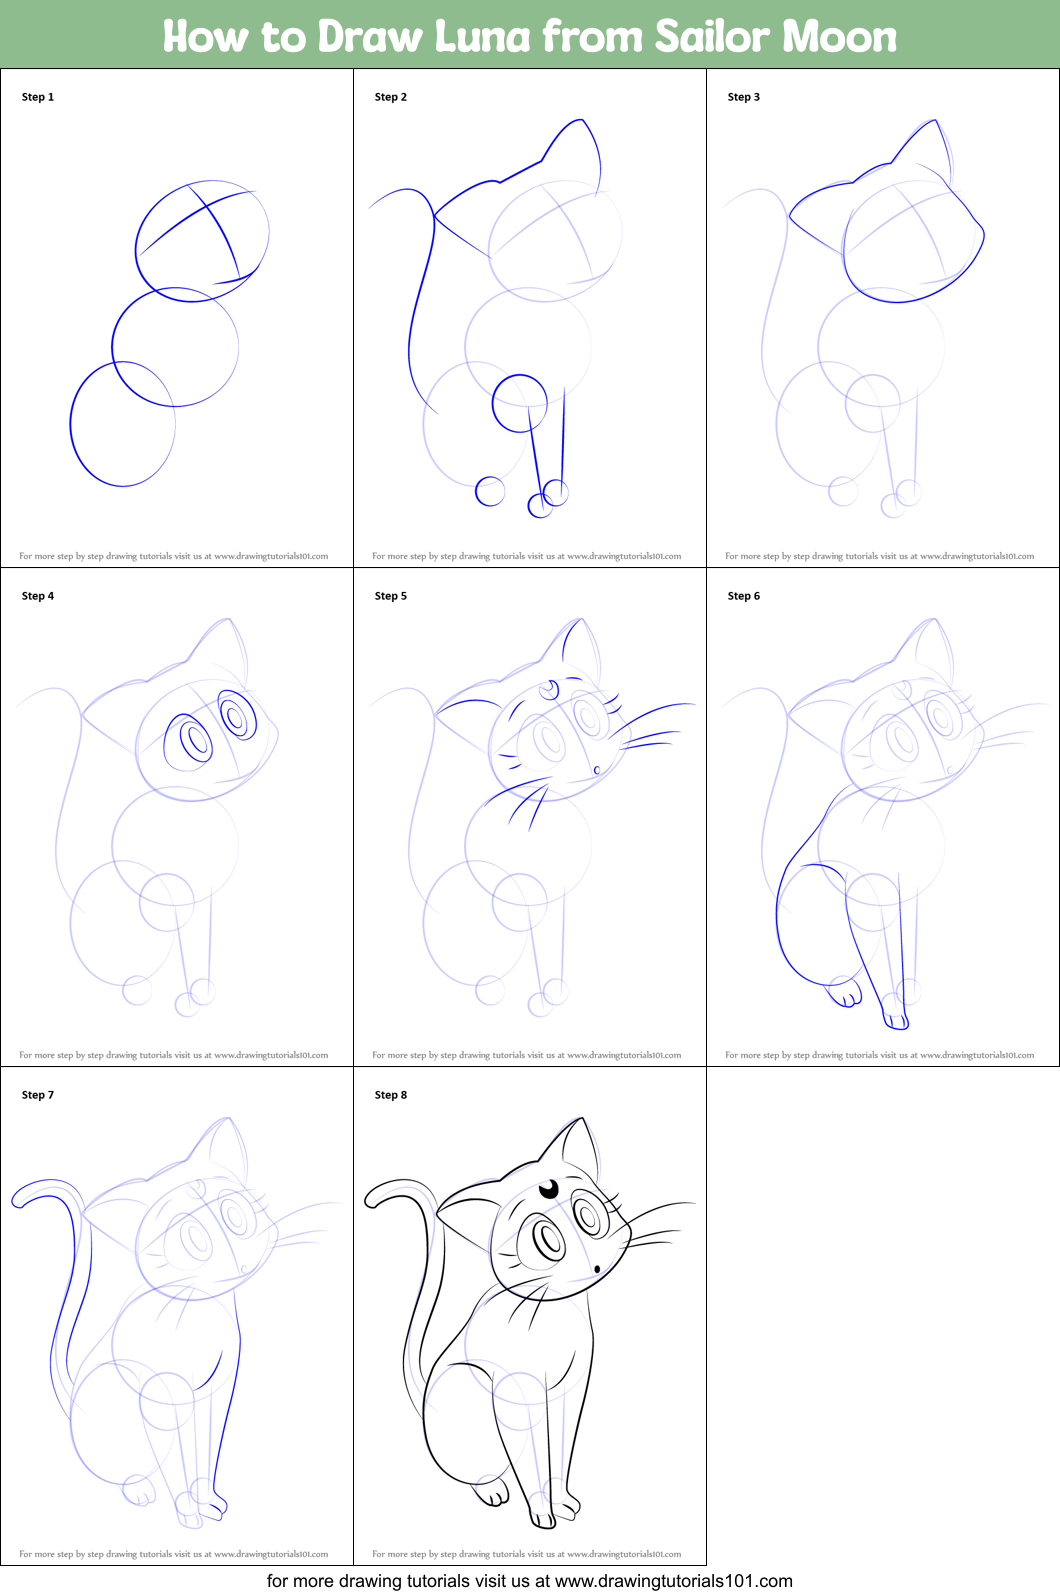 How To Draw Sailor Moon Characters Step By Step